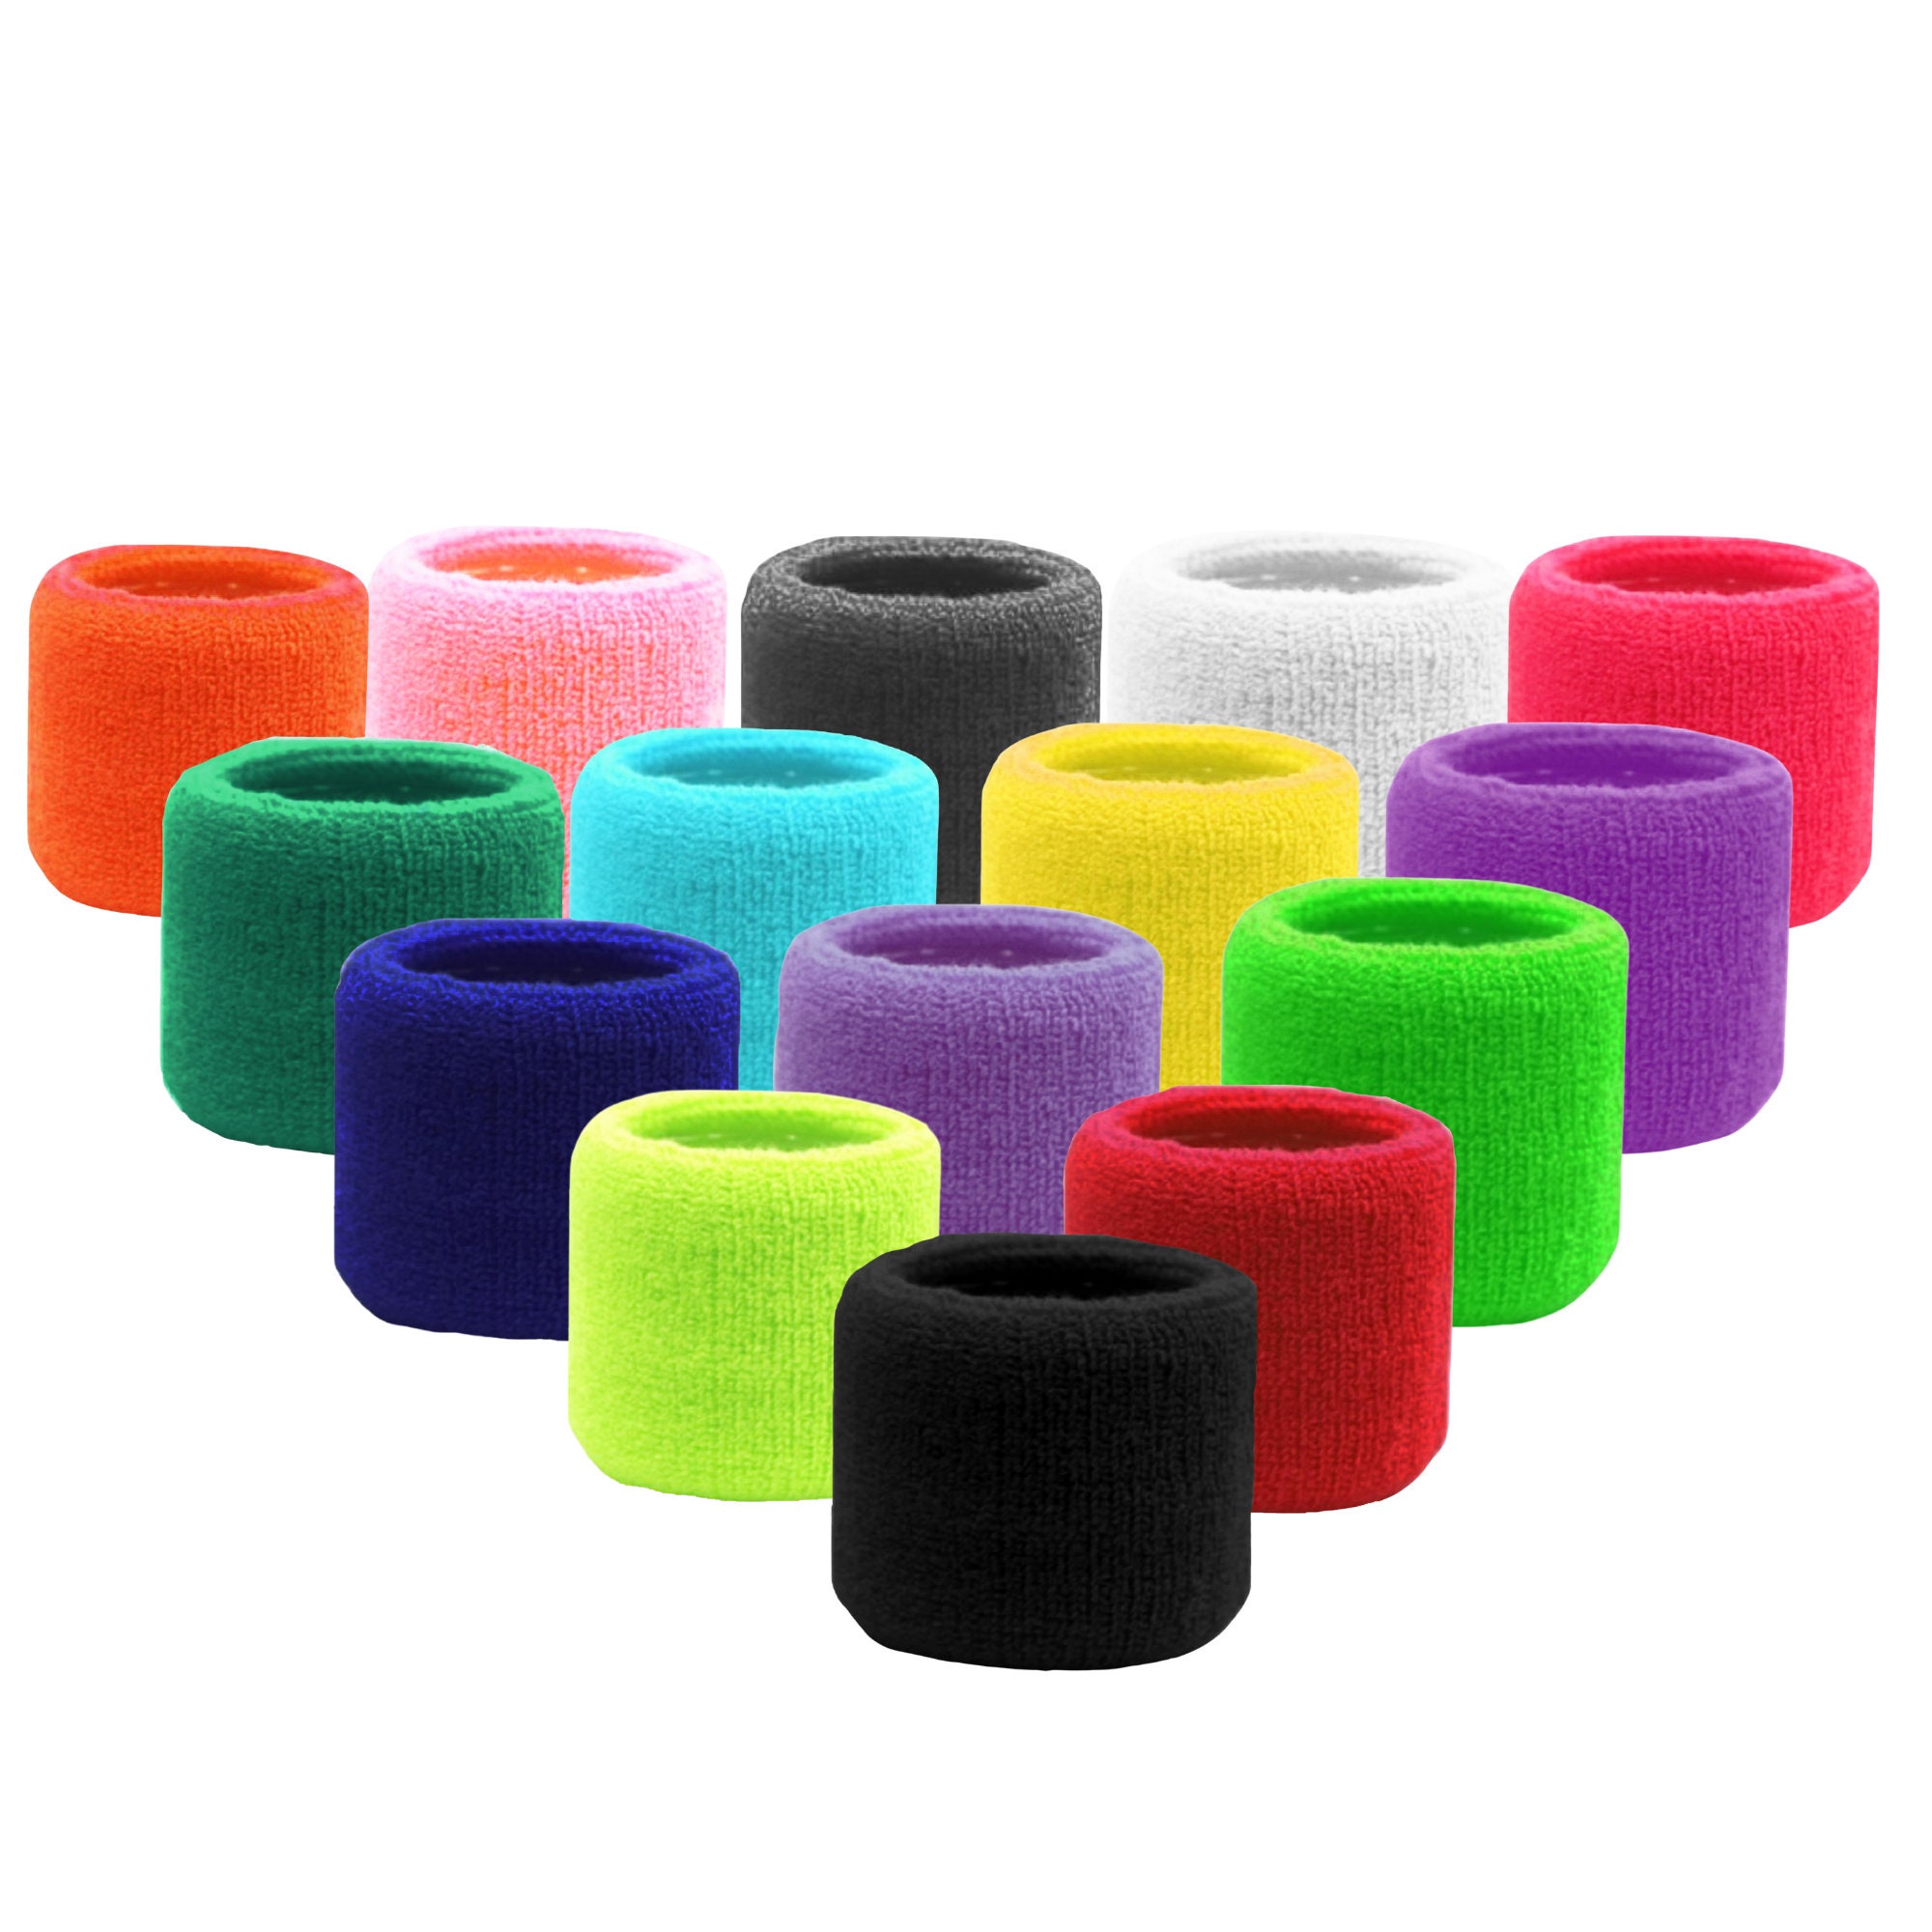  PICSIL Cotton Wrist Sweatbands, Absorbent and